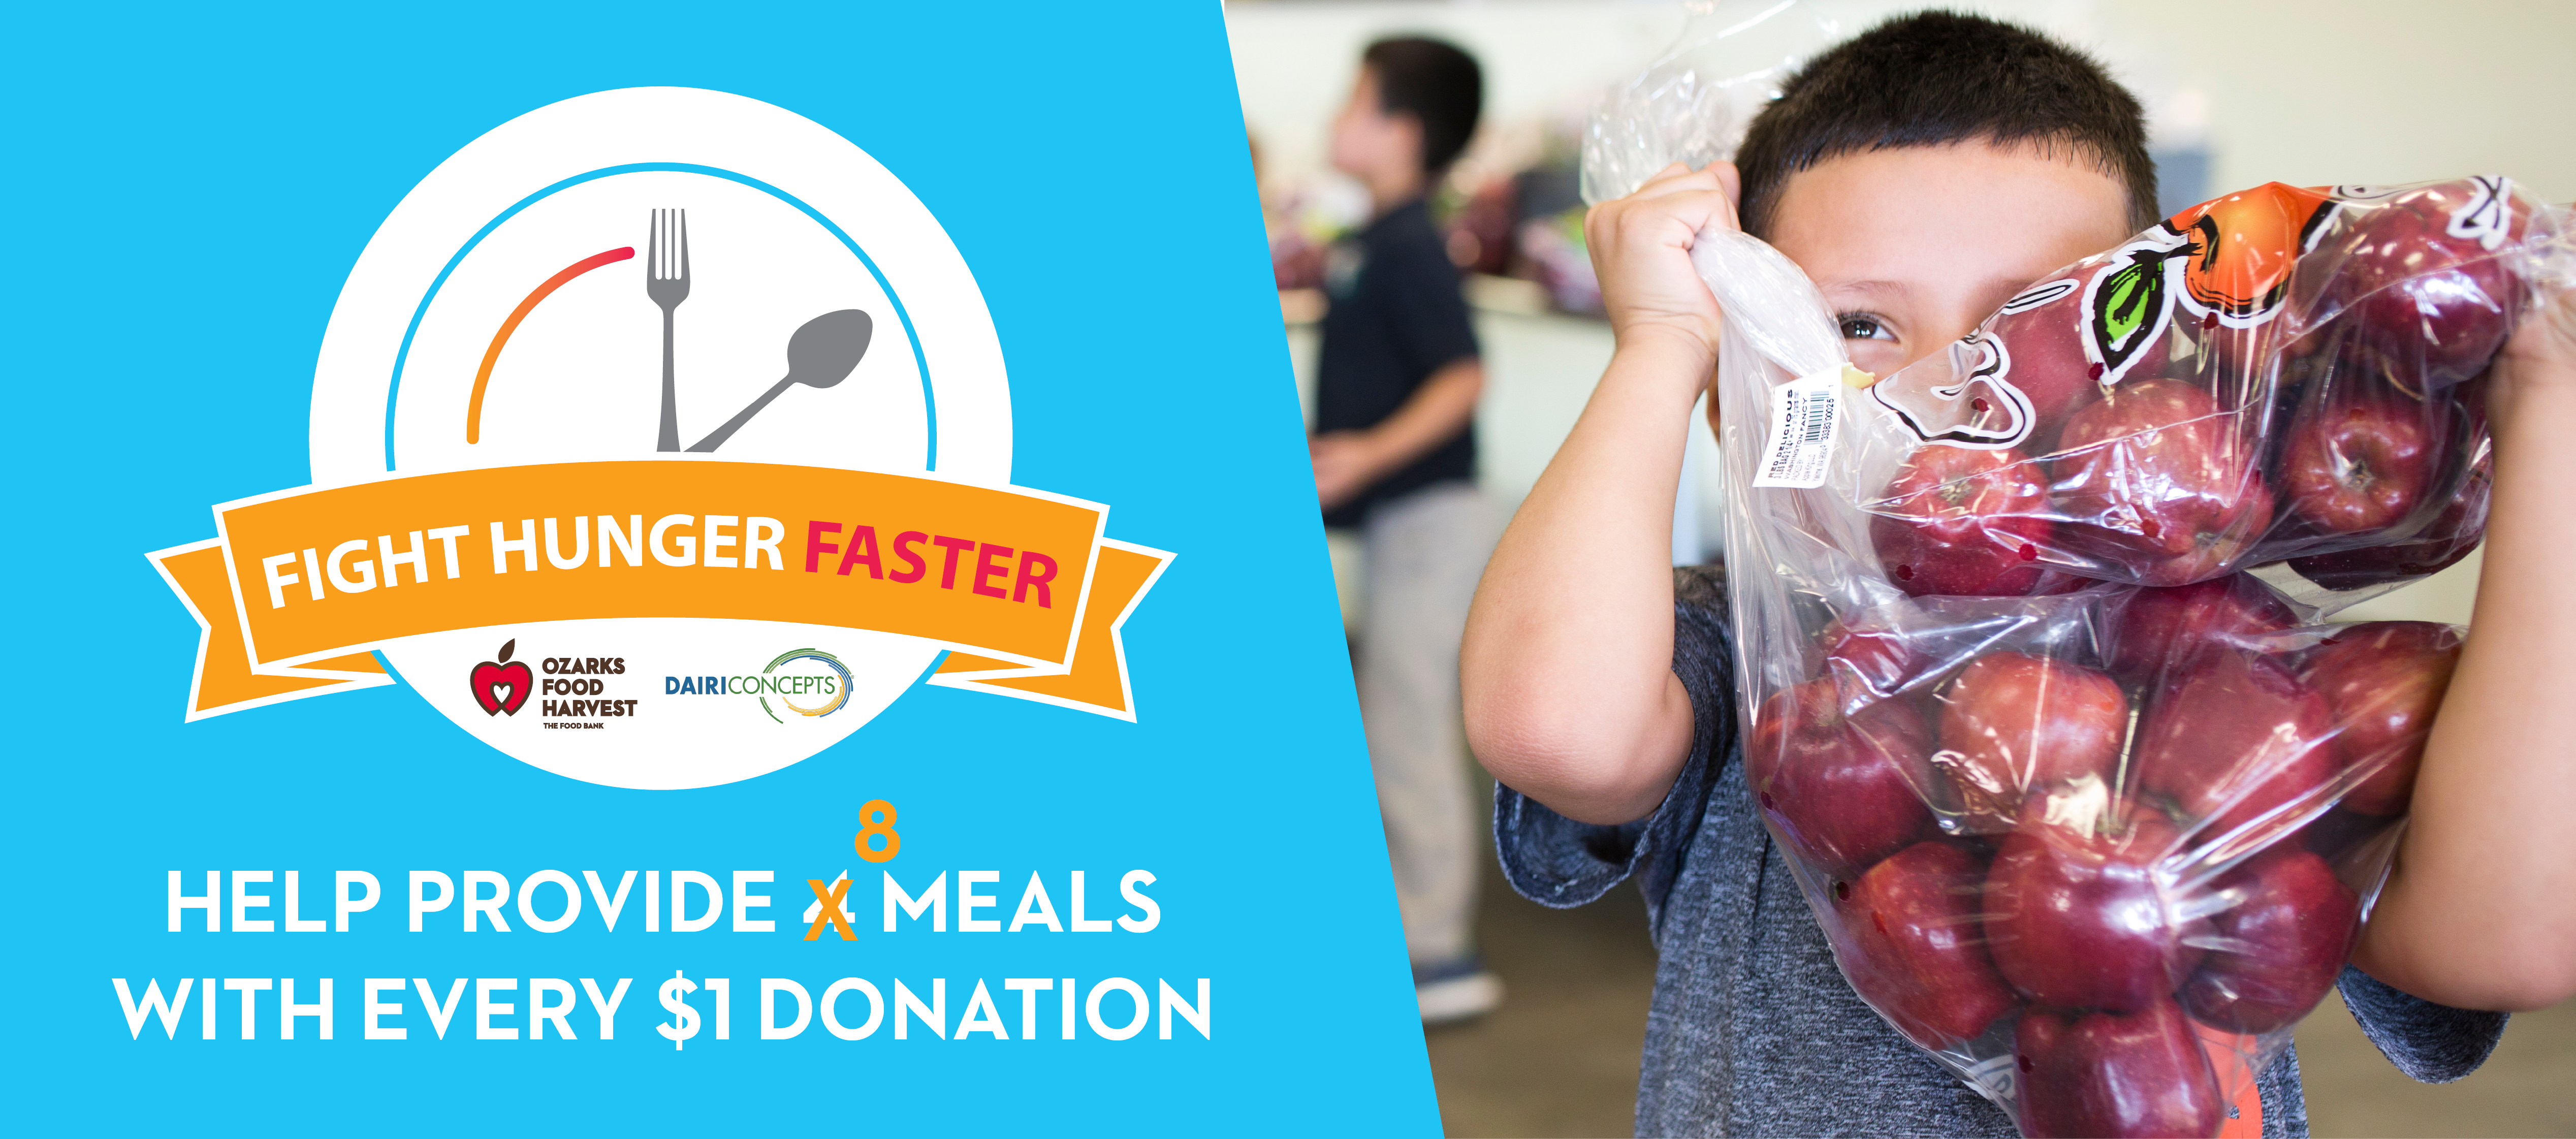 Fight Hunger Faster 2019